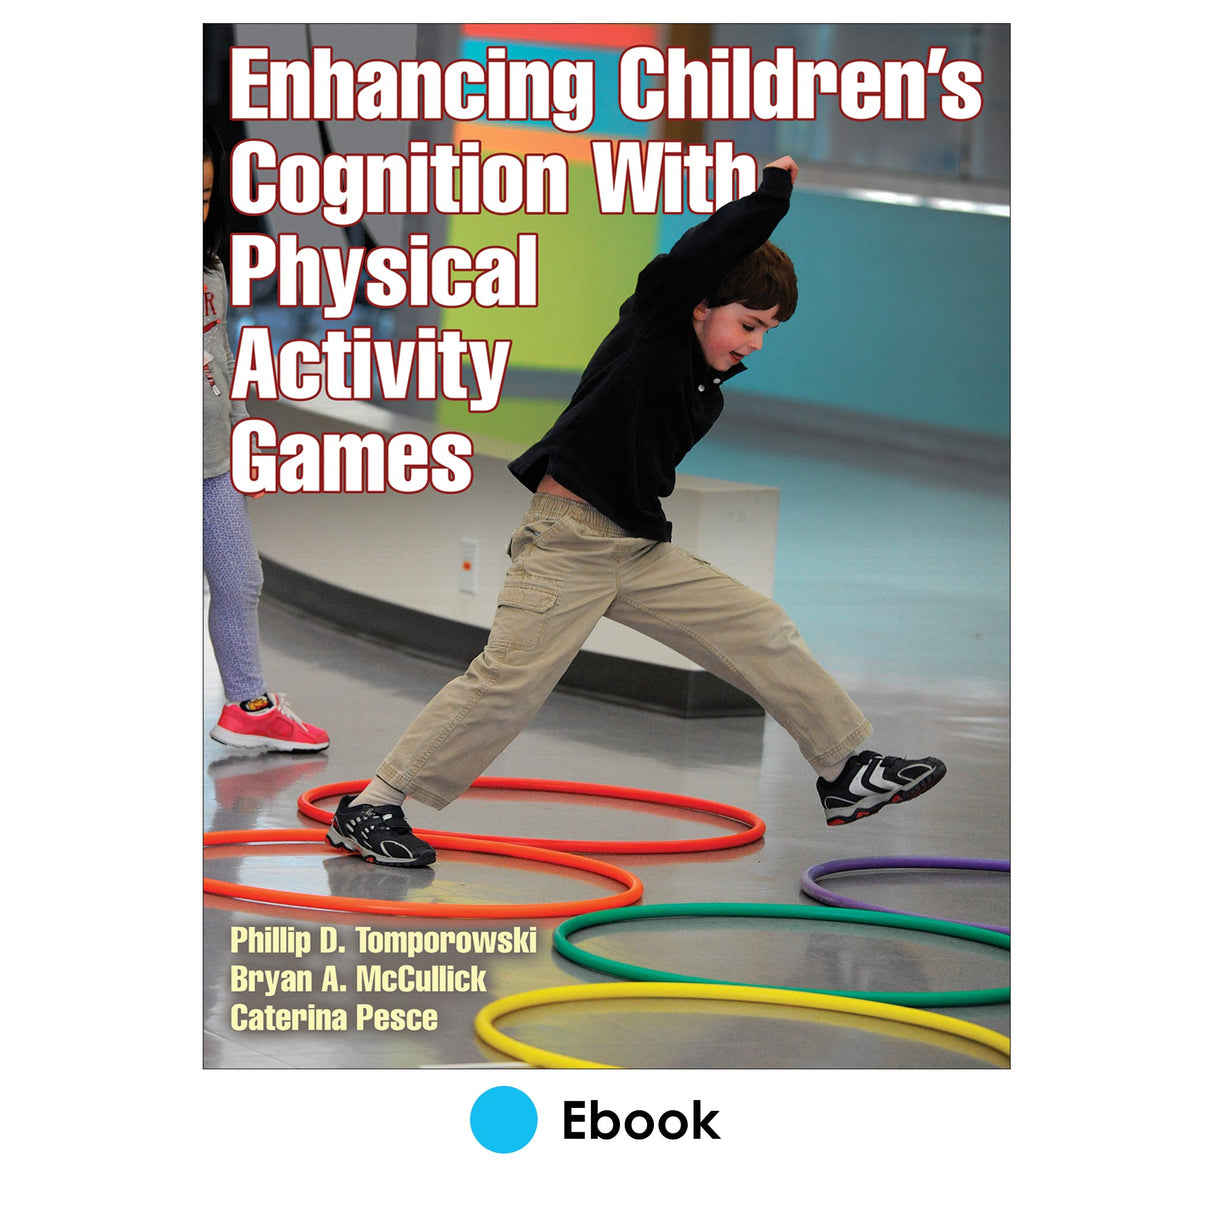 Enhancing Children's Cognition With Physical Activity Games PDF